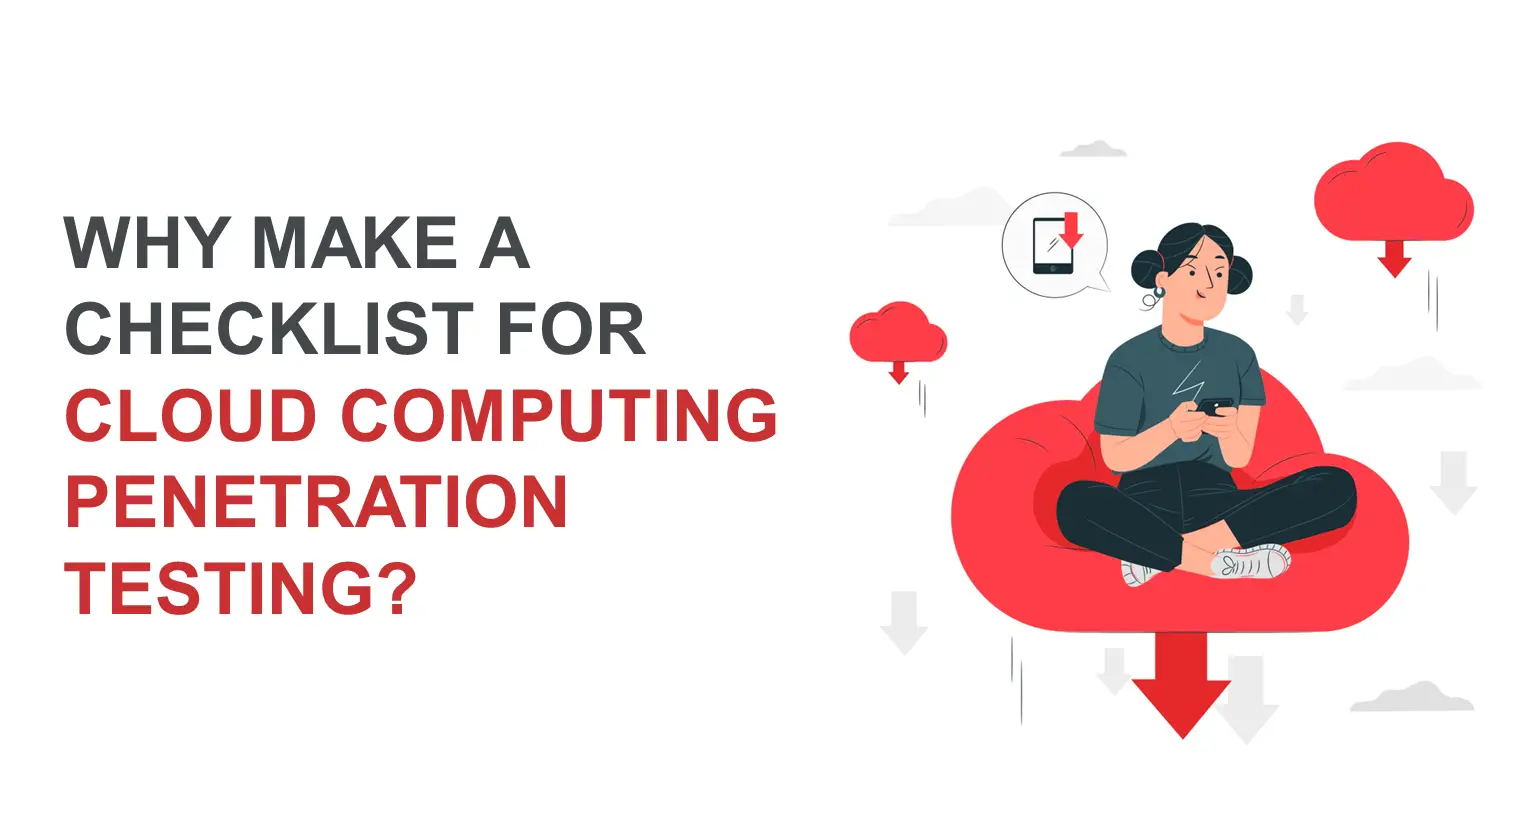 Why Make A Checklist For Cloud Computing Penetration Testing?